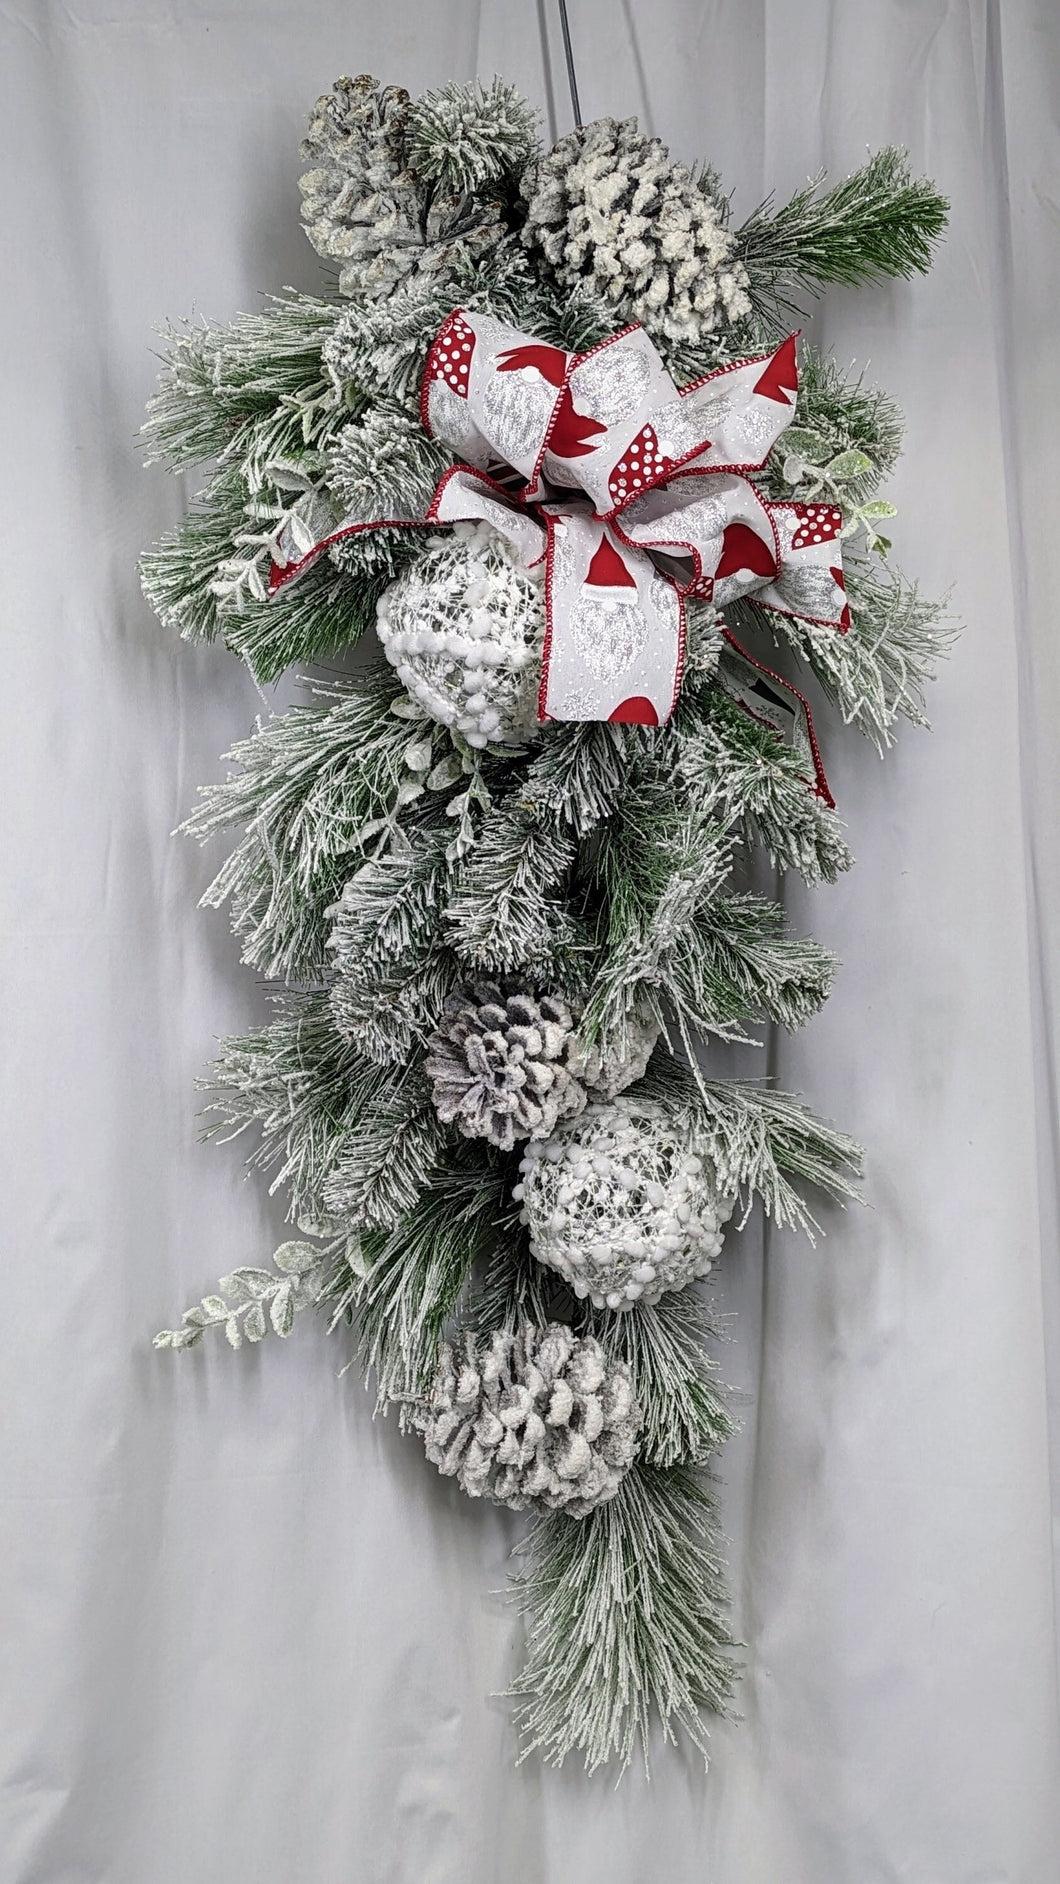 Ready to Hang Swag Artificial Christmas Holiday Winter Indoor for Wall or Door display